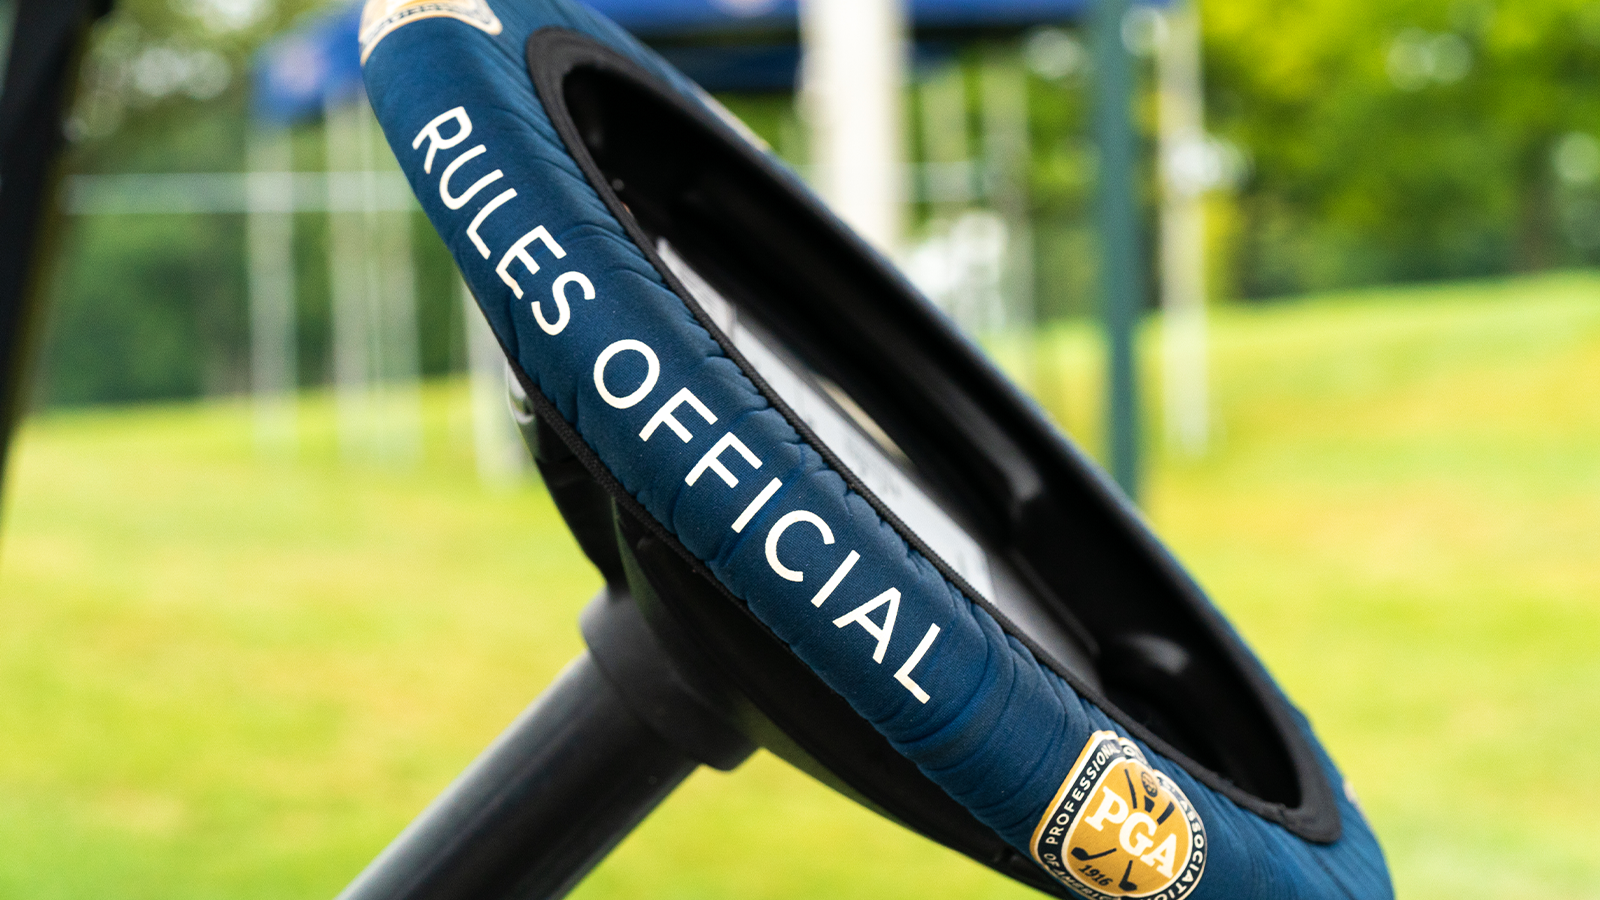 The Rules of Golf Equipment